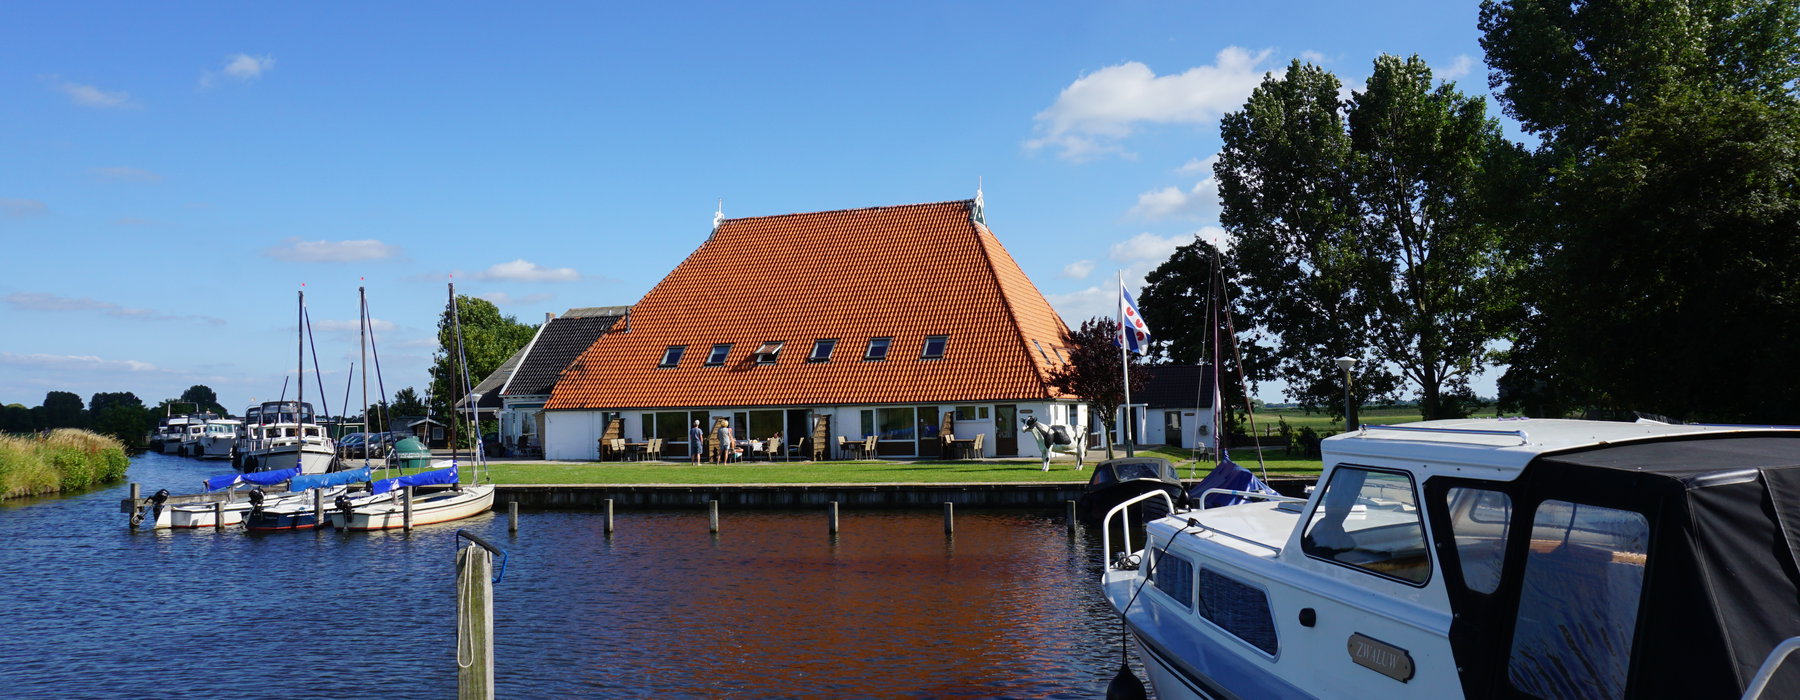 Attractive holiday home rental in Friesland